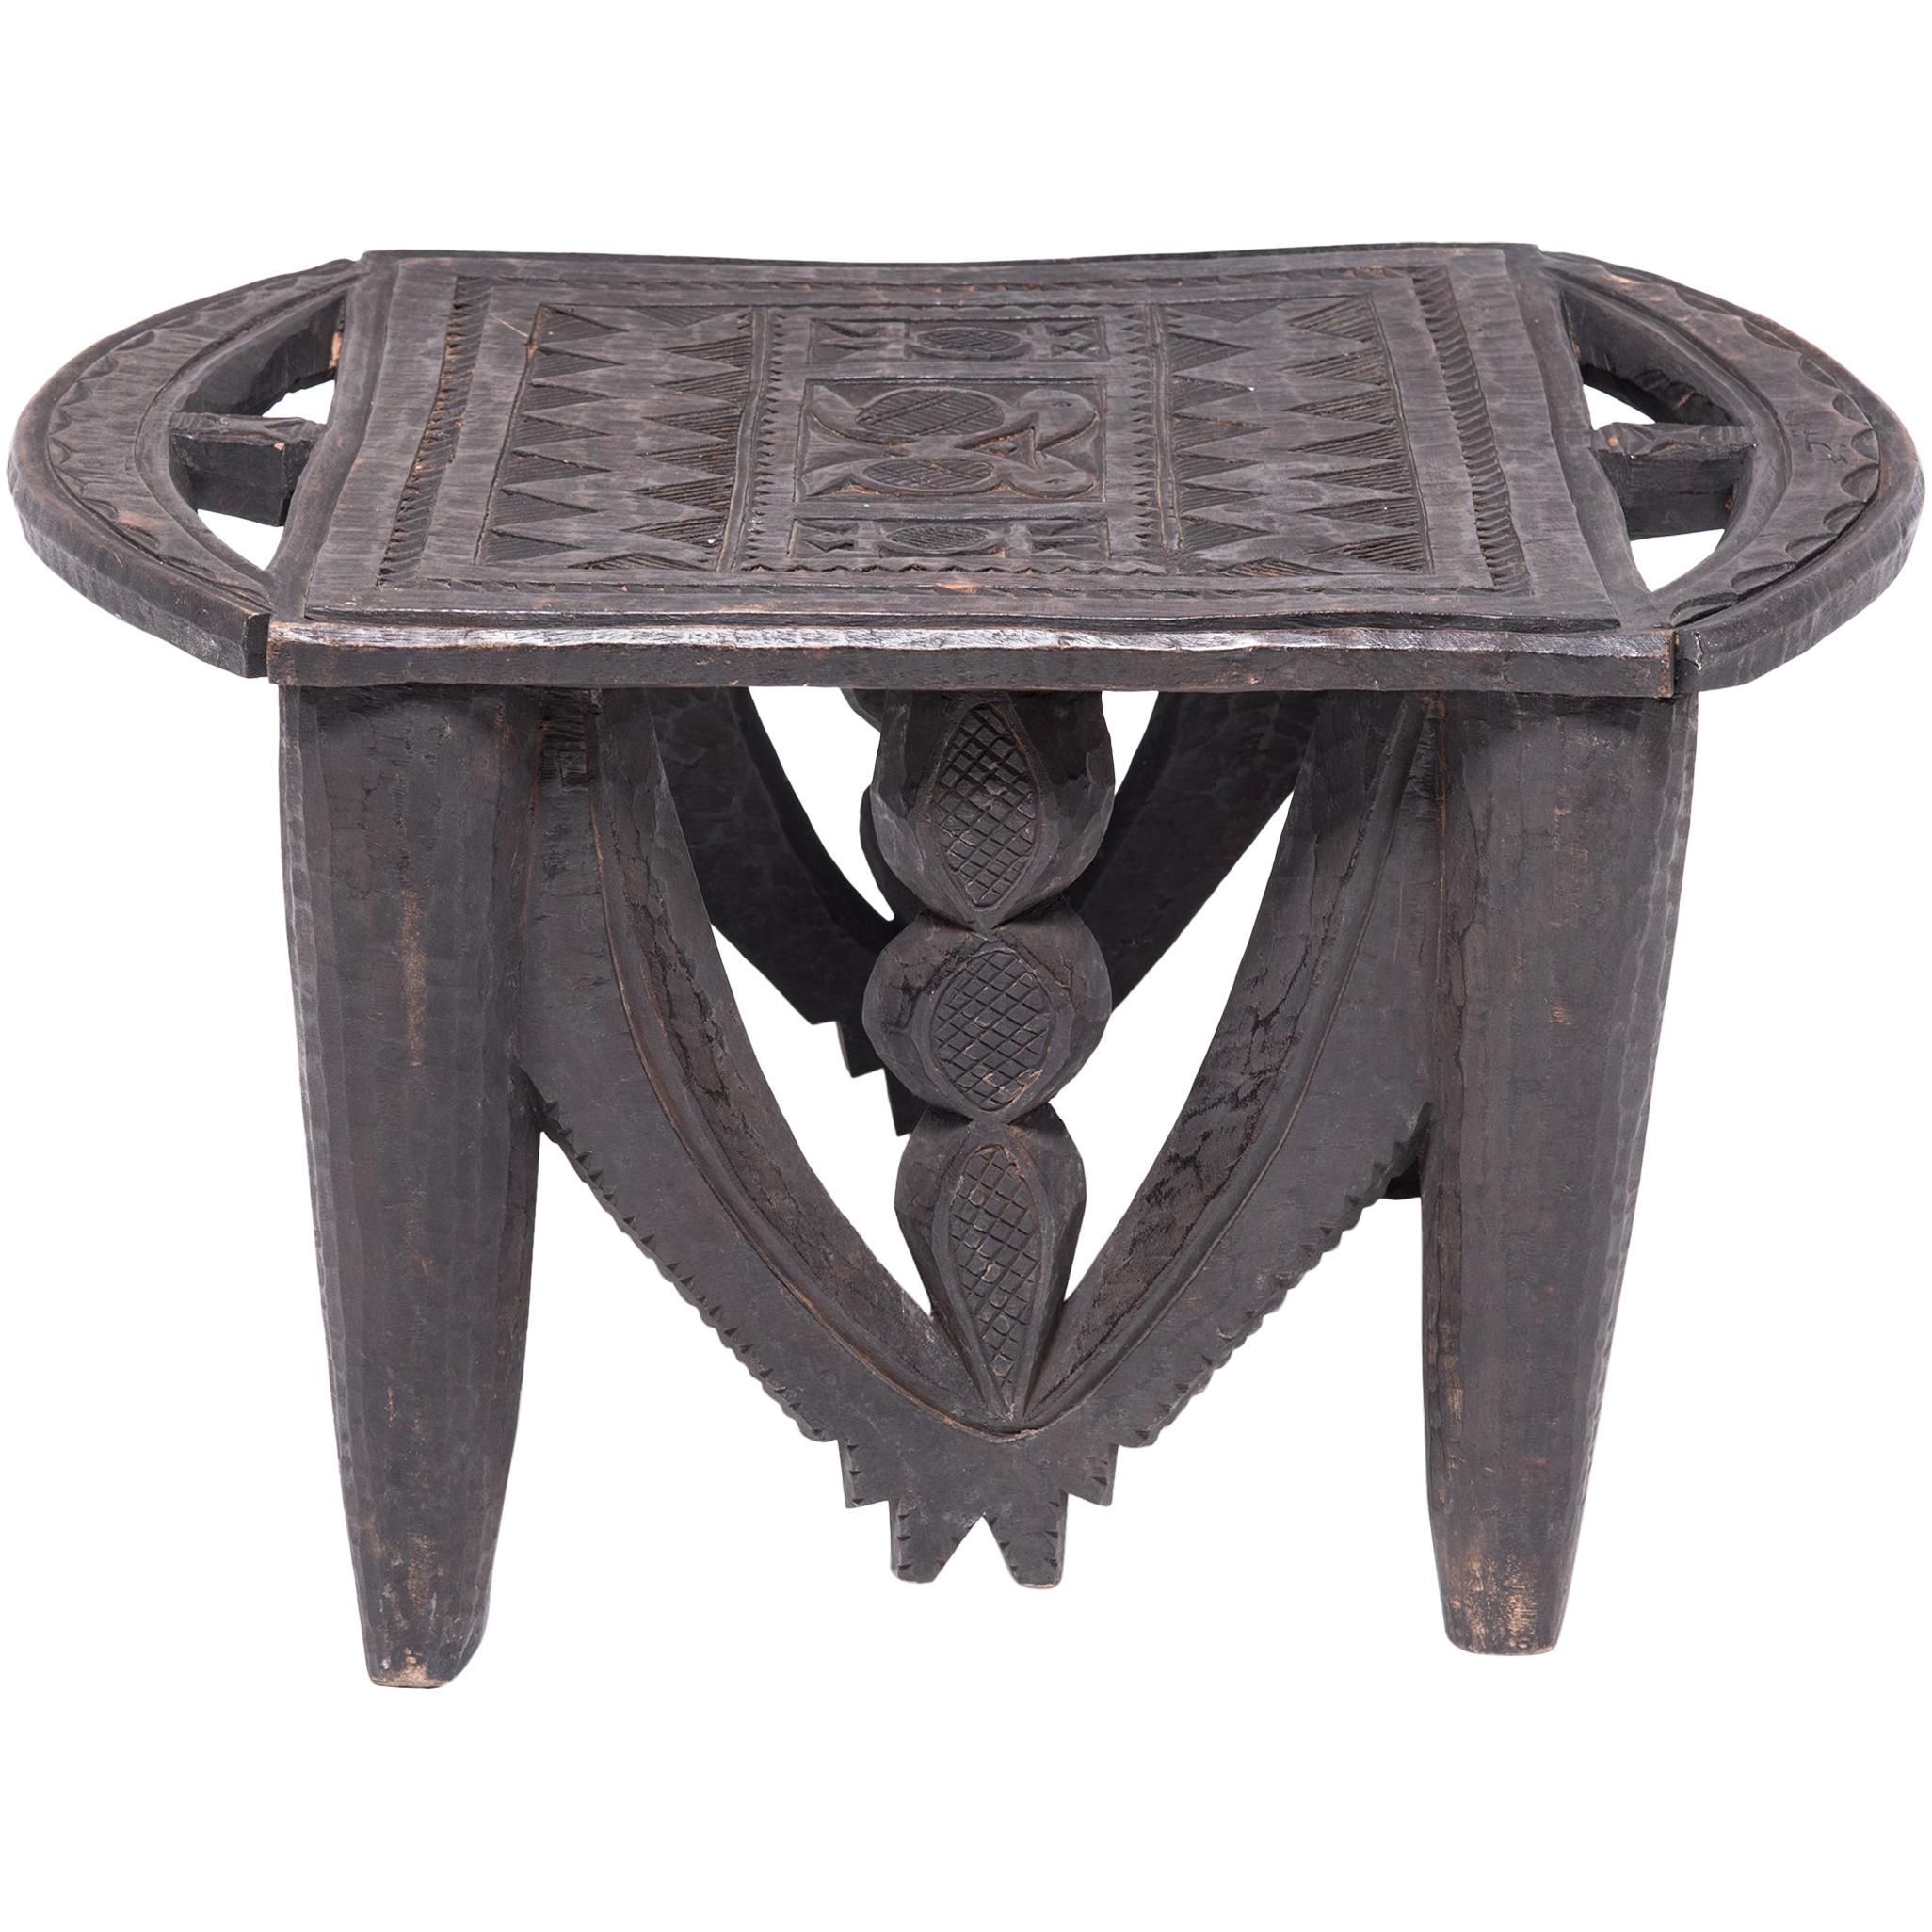 Early 20th Century Nigerian Nupe Stool with Animal Motifs